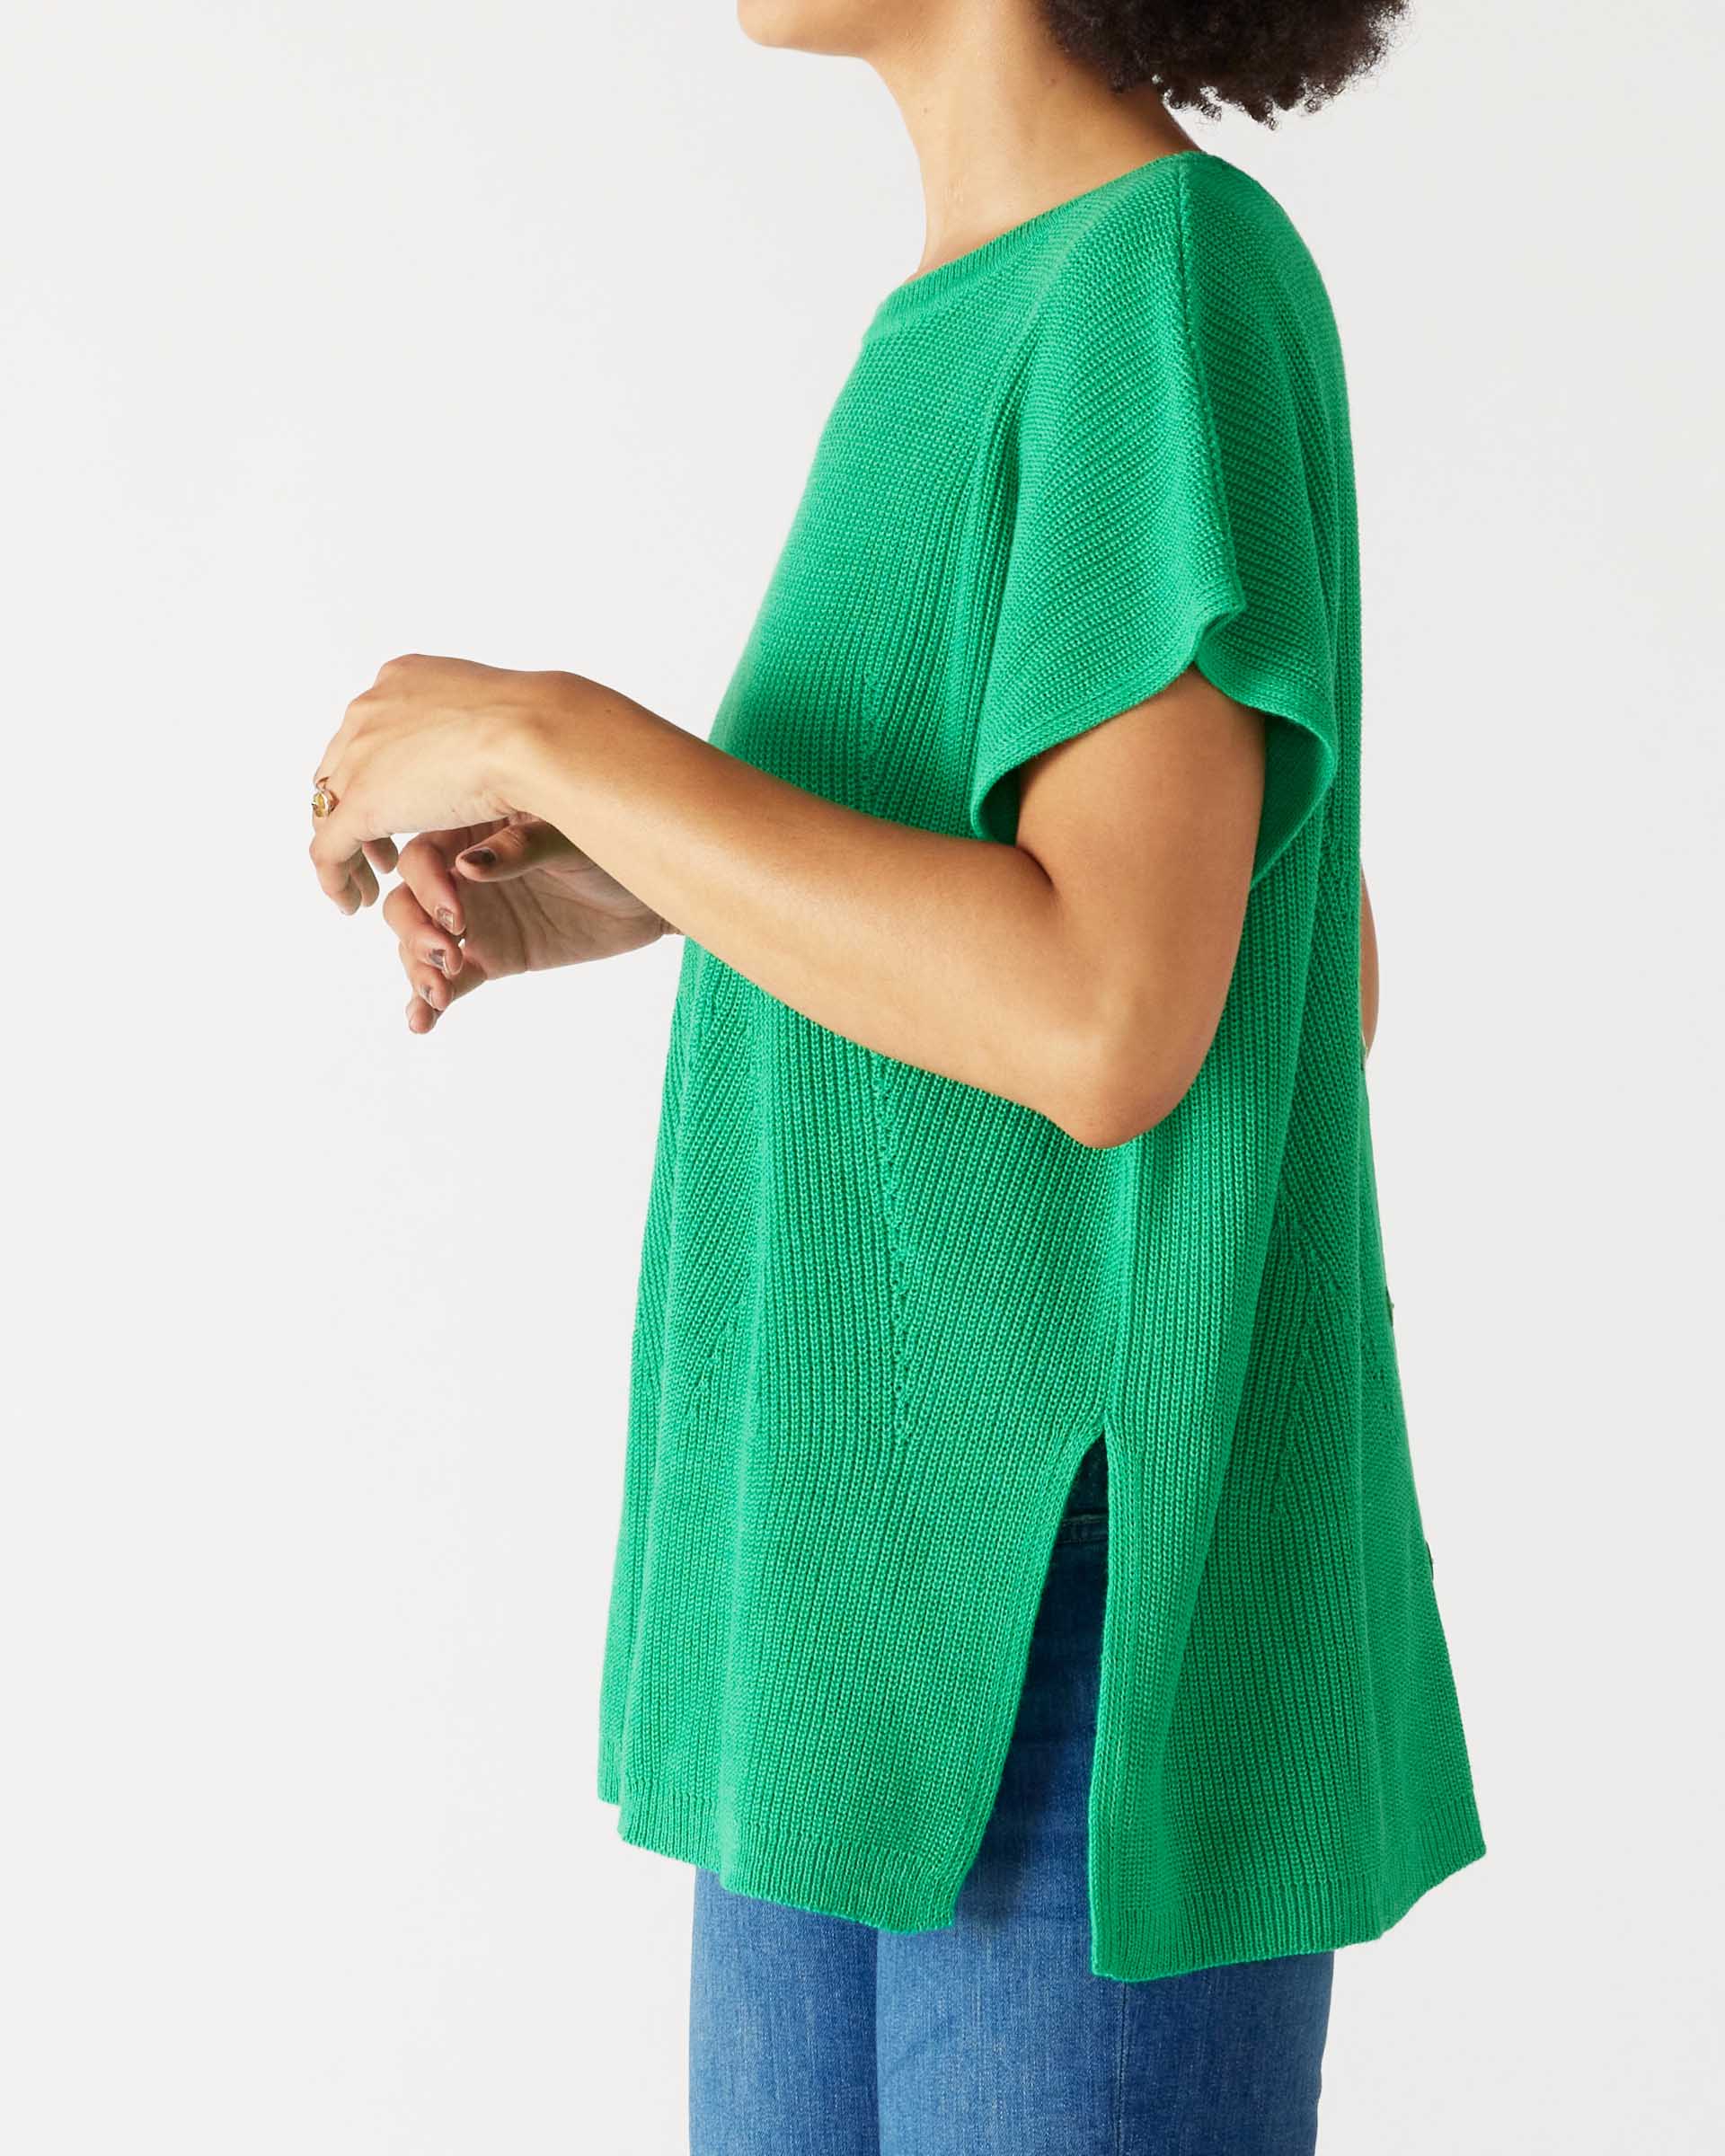 Women's One Size Green Short Sleeve Sweater with Buttons Down Back Side View